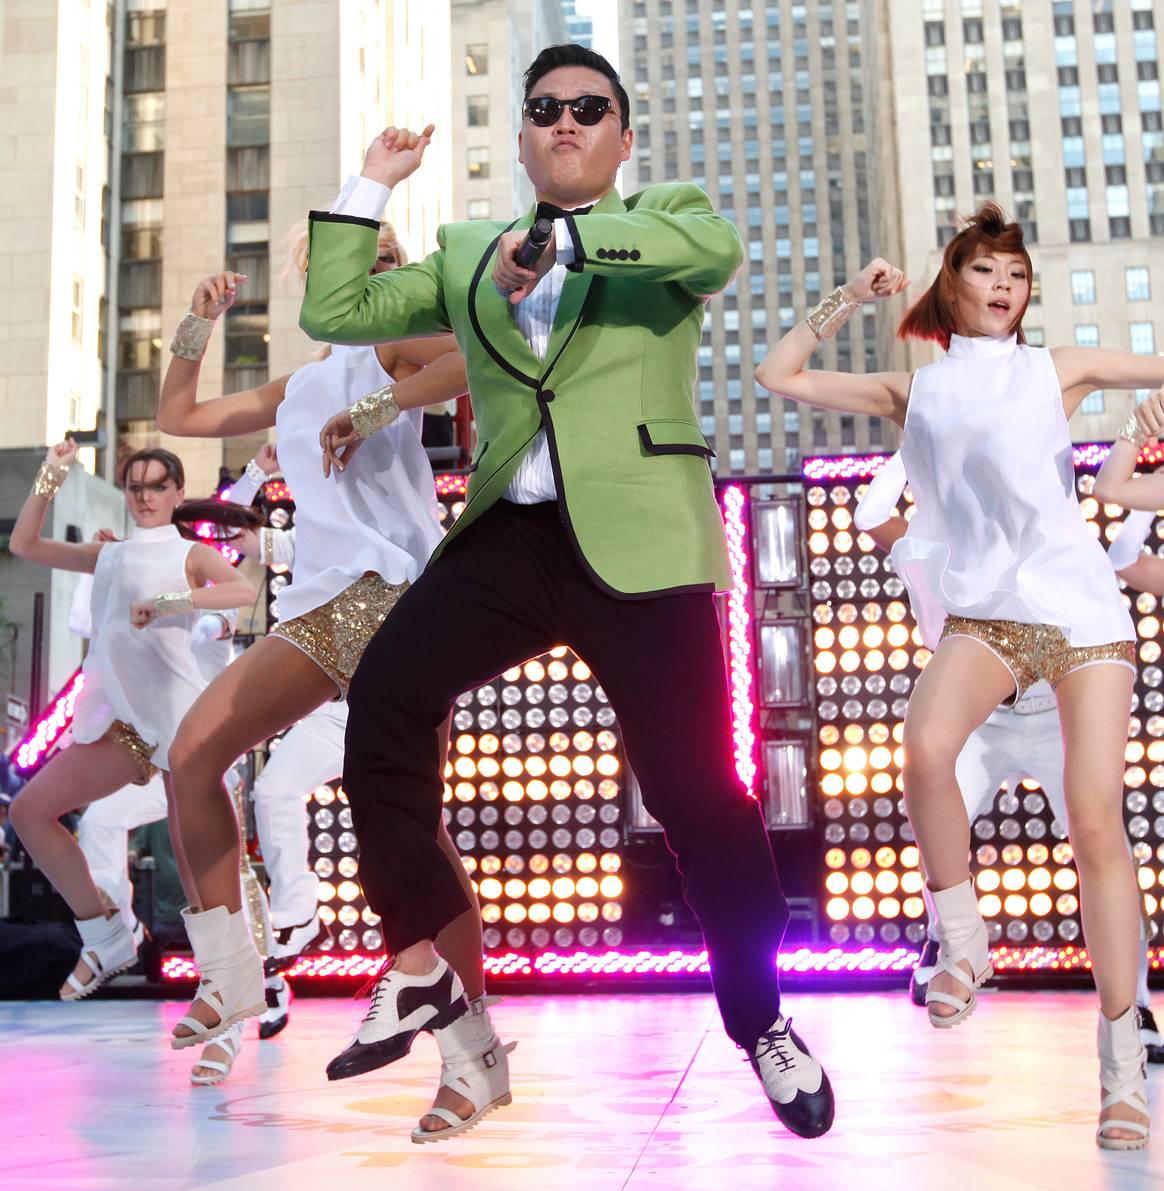 Image: courtesy of Jason Decrow/Invision/AP/Shutterstock; Psy performs Gangnam Style on Today, 2012, New York, USA.